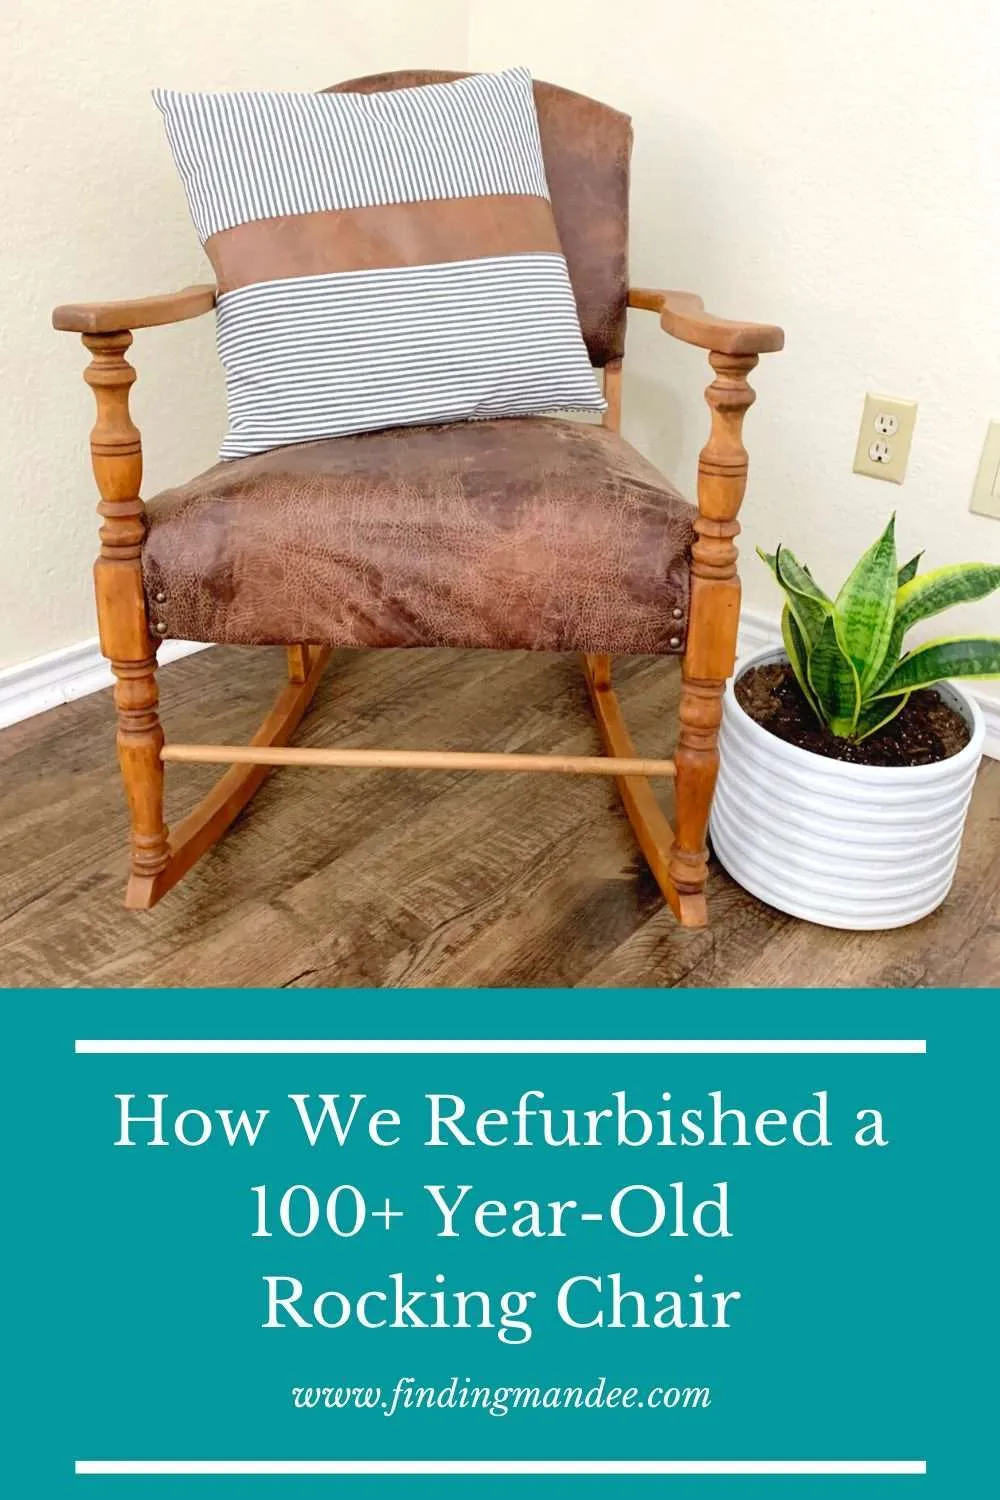 How We Refurbished a 100-Year-Old Rocking Chair | Finding Mandee